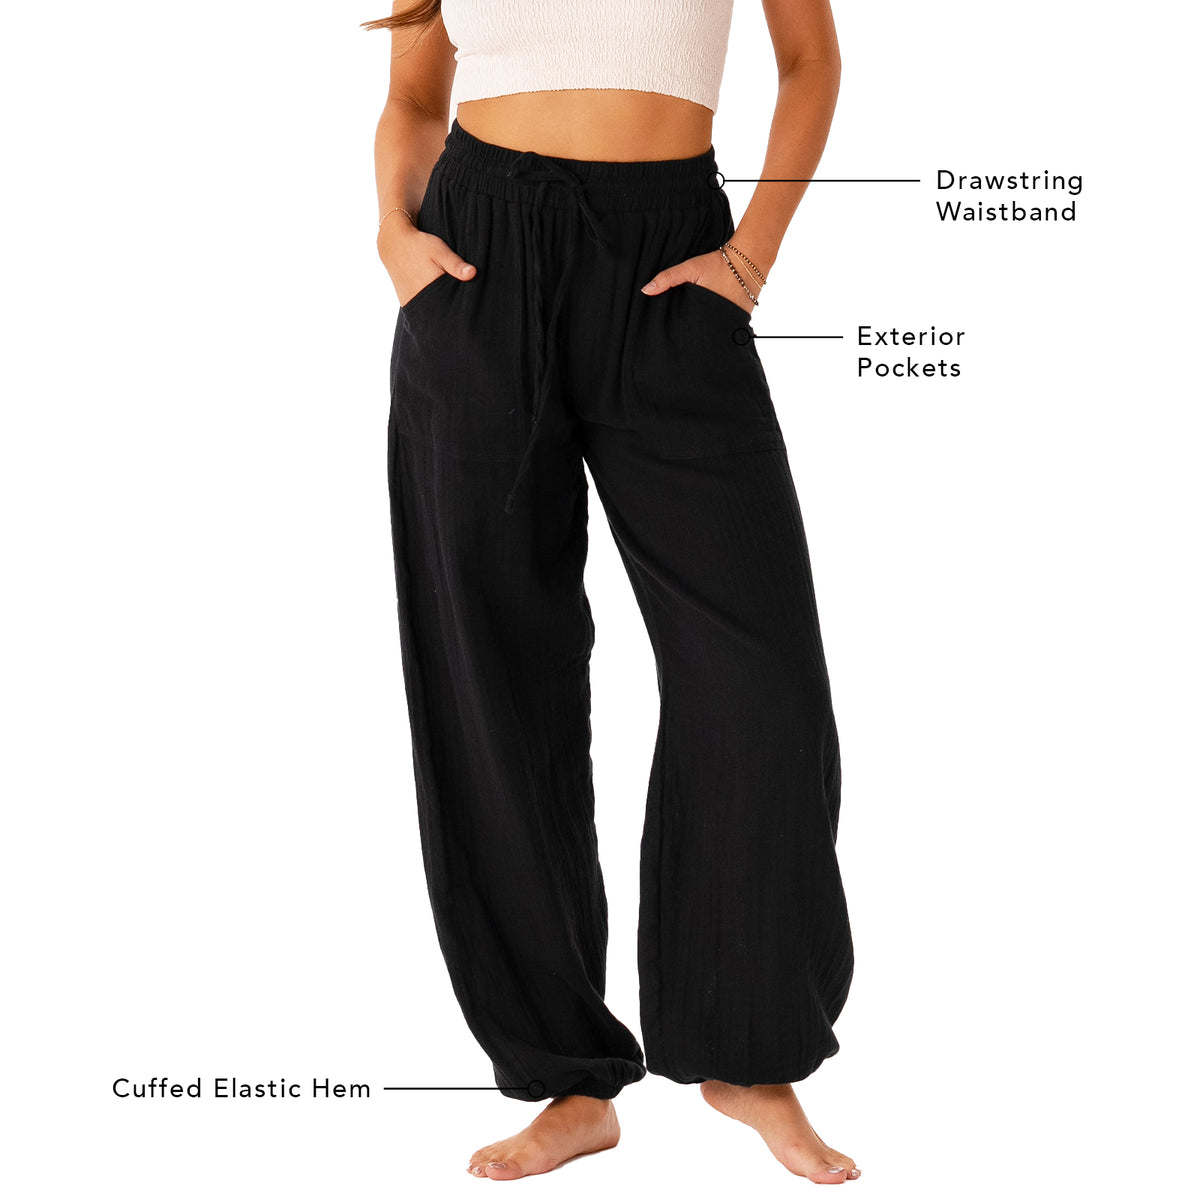 Model wearing black harem pants with a drawstring waistband. The picture outlines different features of the pants including a drawstring waistband, exterior pockets and a cuffed elastic hem